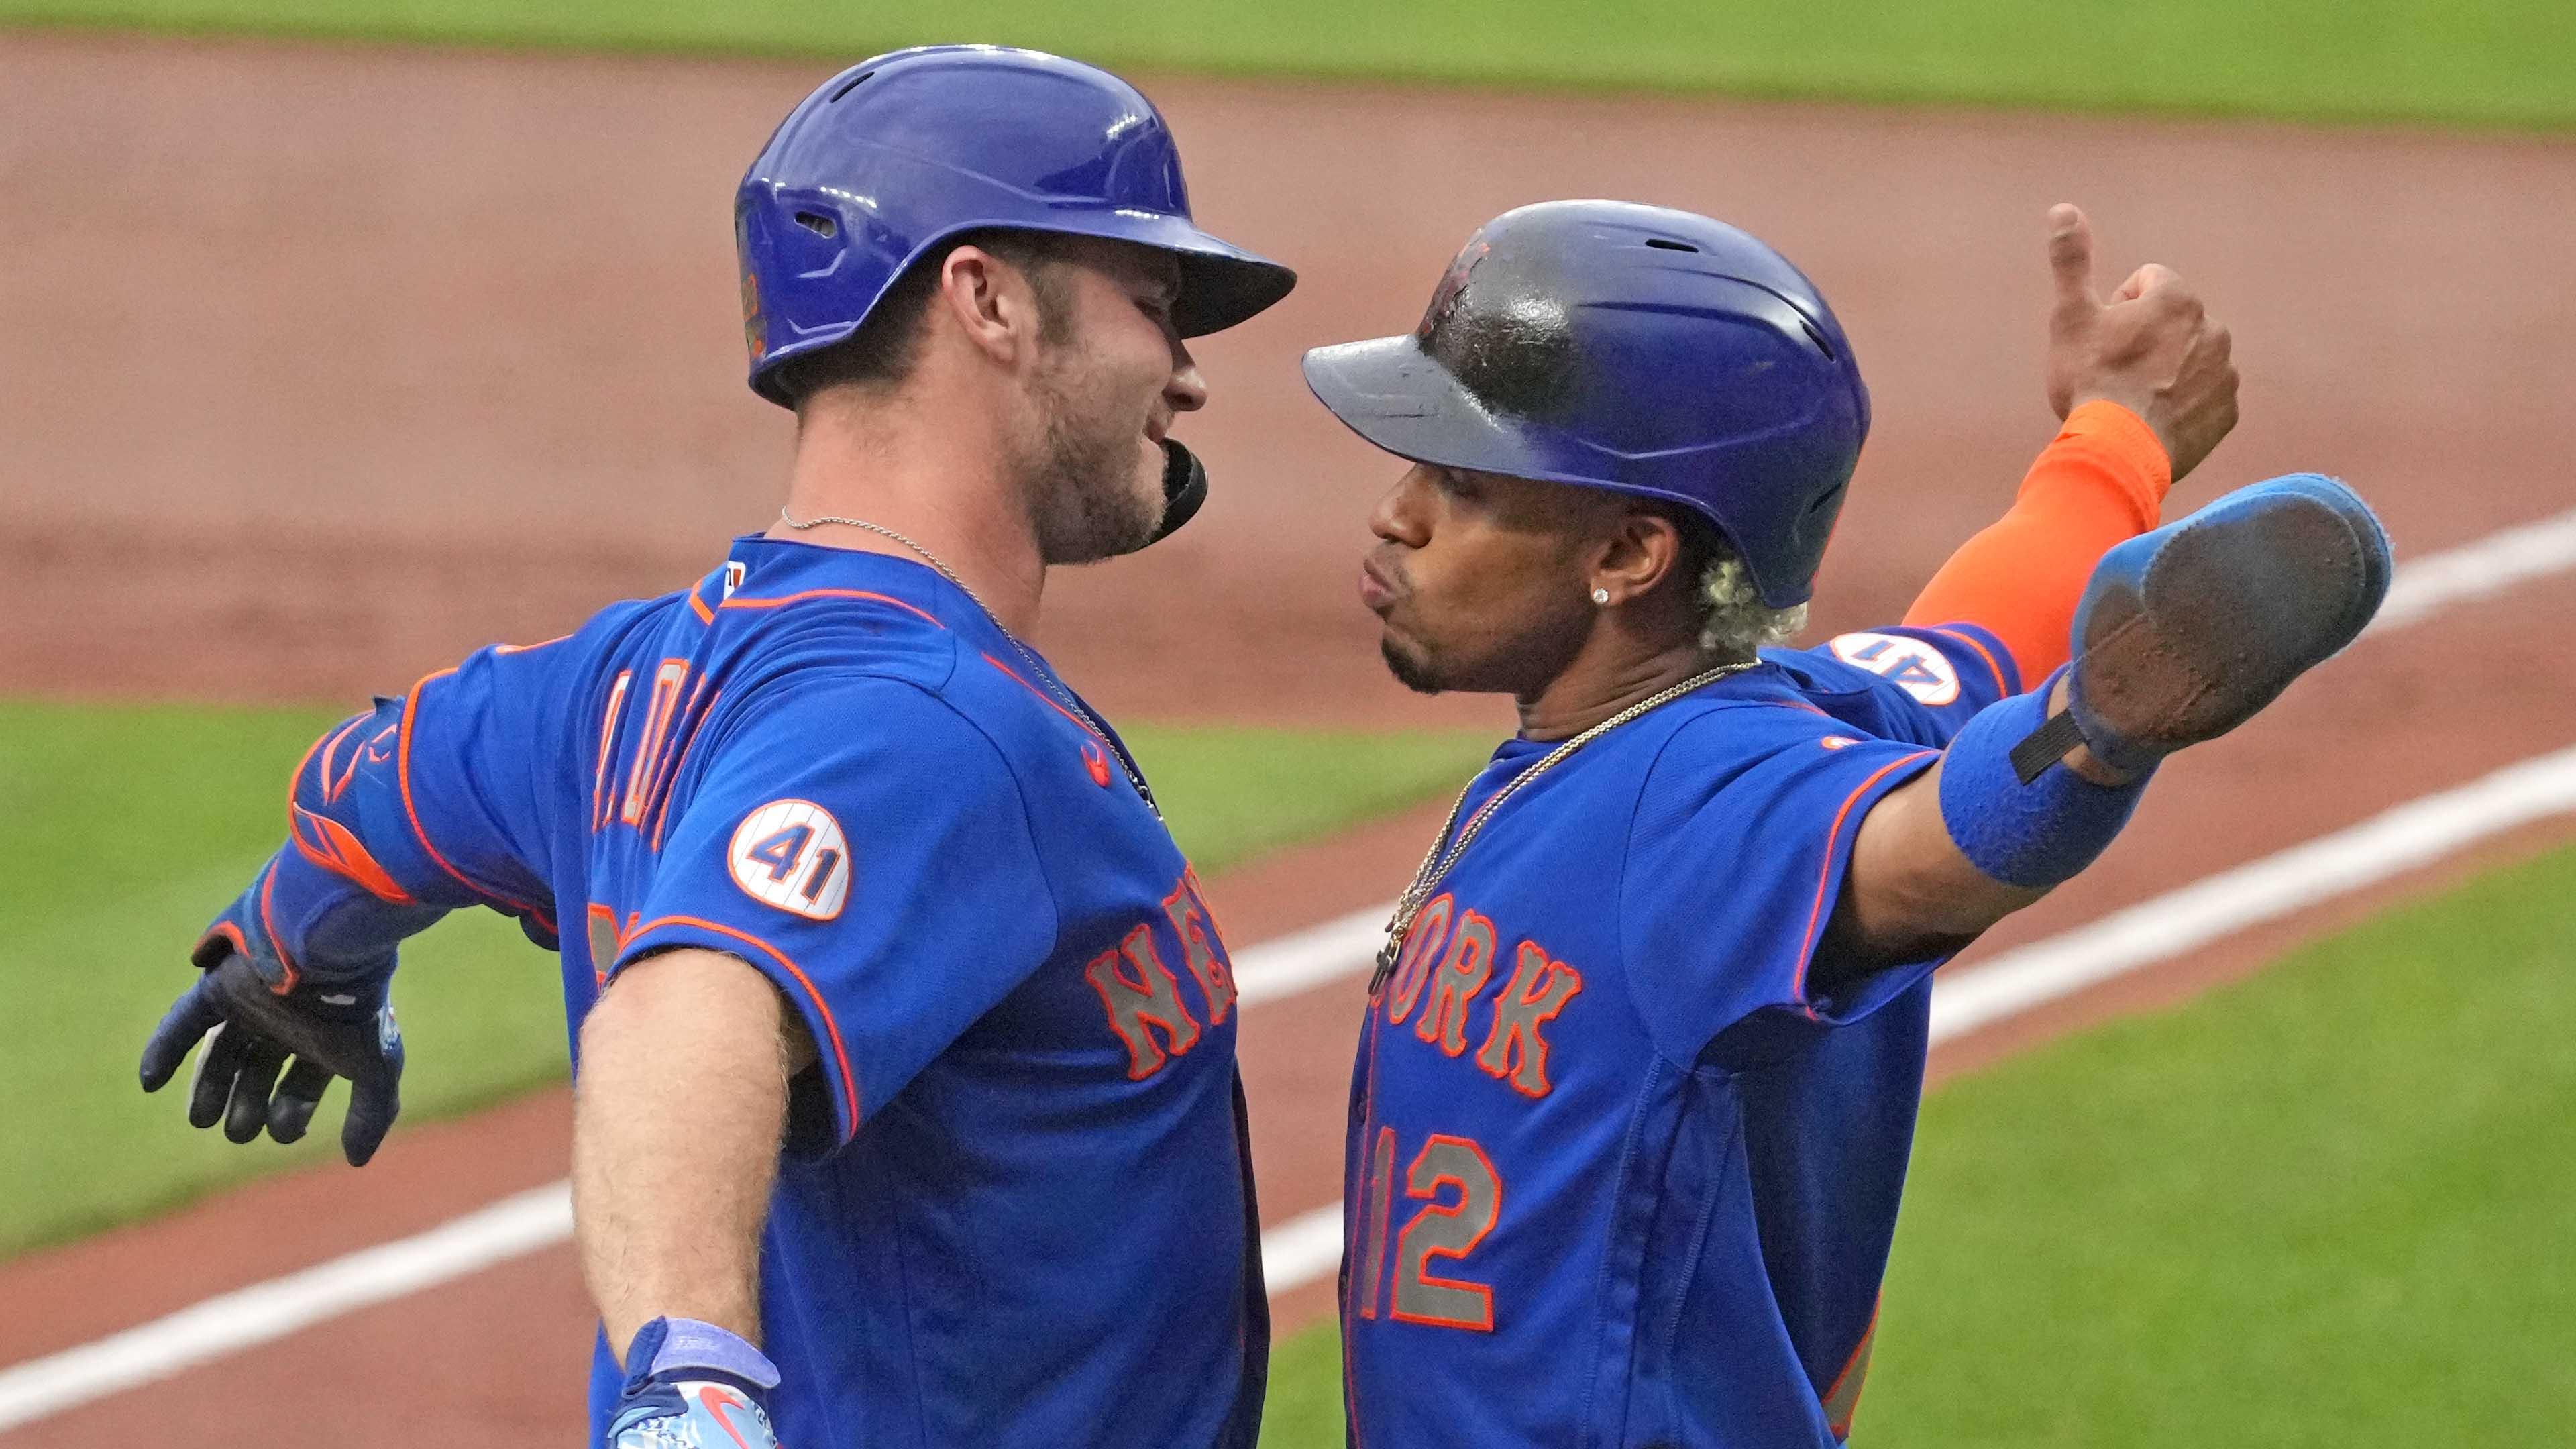 Jun 9, 2021; Baltimore, Maryland, USA; New York Mets first baseman Pete Alonso (20) is greeted by shortstop Francisco Lindor (12) who scored on his two run home run in the first inning against the Baltimore Orioles at Oriole Park at Camden Yards. / Mitch Stringer-USA TODAY Sports